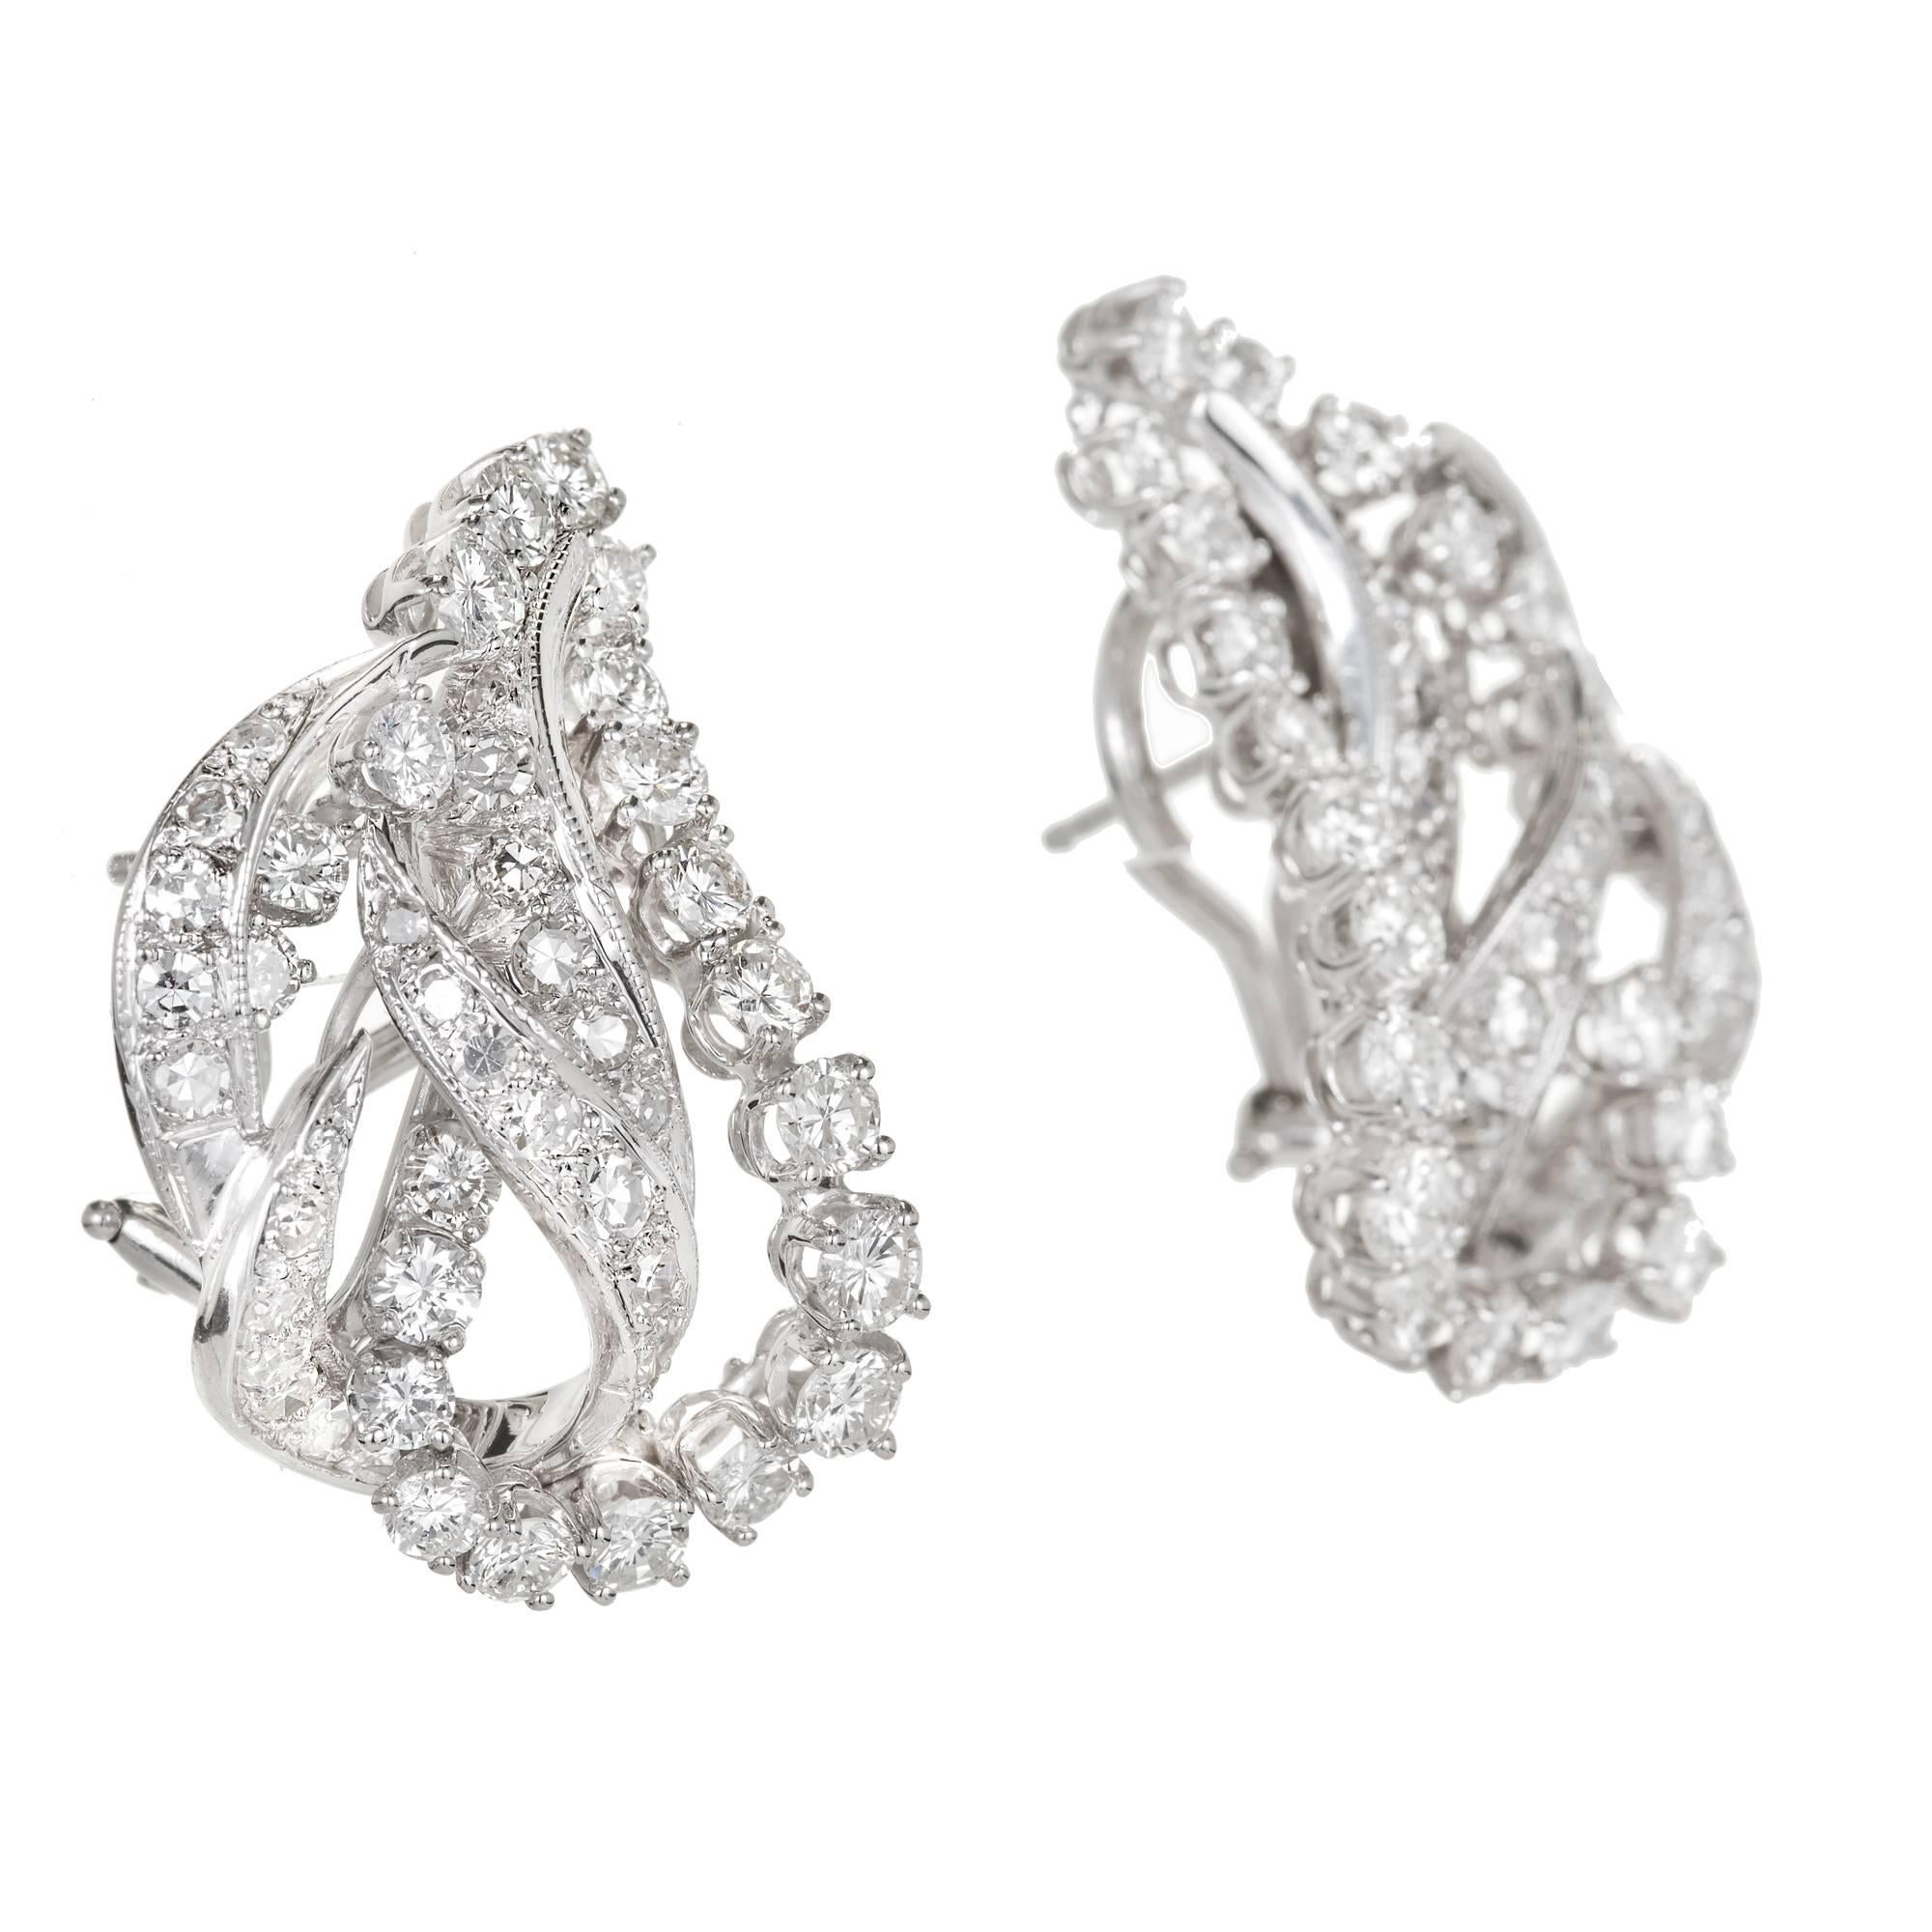 1950’s handmade 2 dimensional classic swirl clip post earrings with full cut and single cut diamonds. Super bright white and sparkly. 

44 full cut diamonds, approx. total weight 2.25cts, F, VS
46 single transitional cut diamonds, approx. total